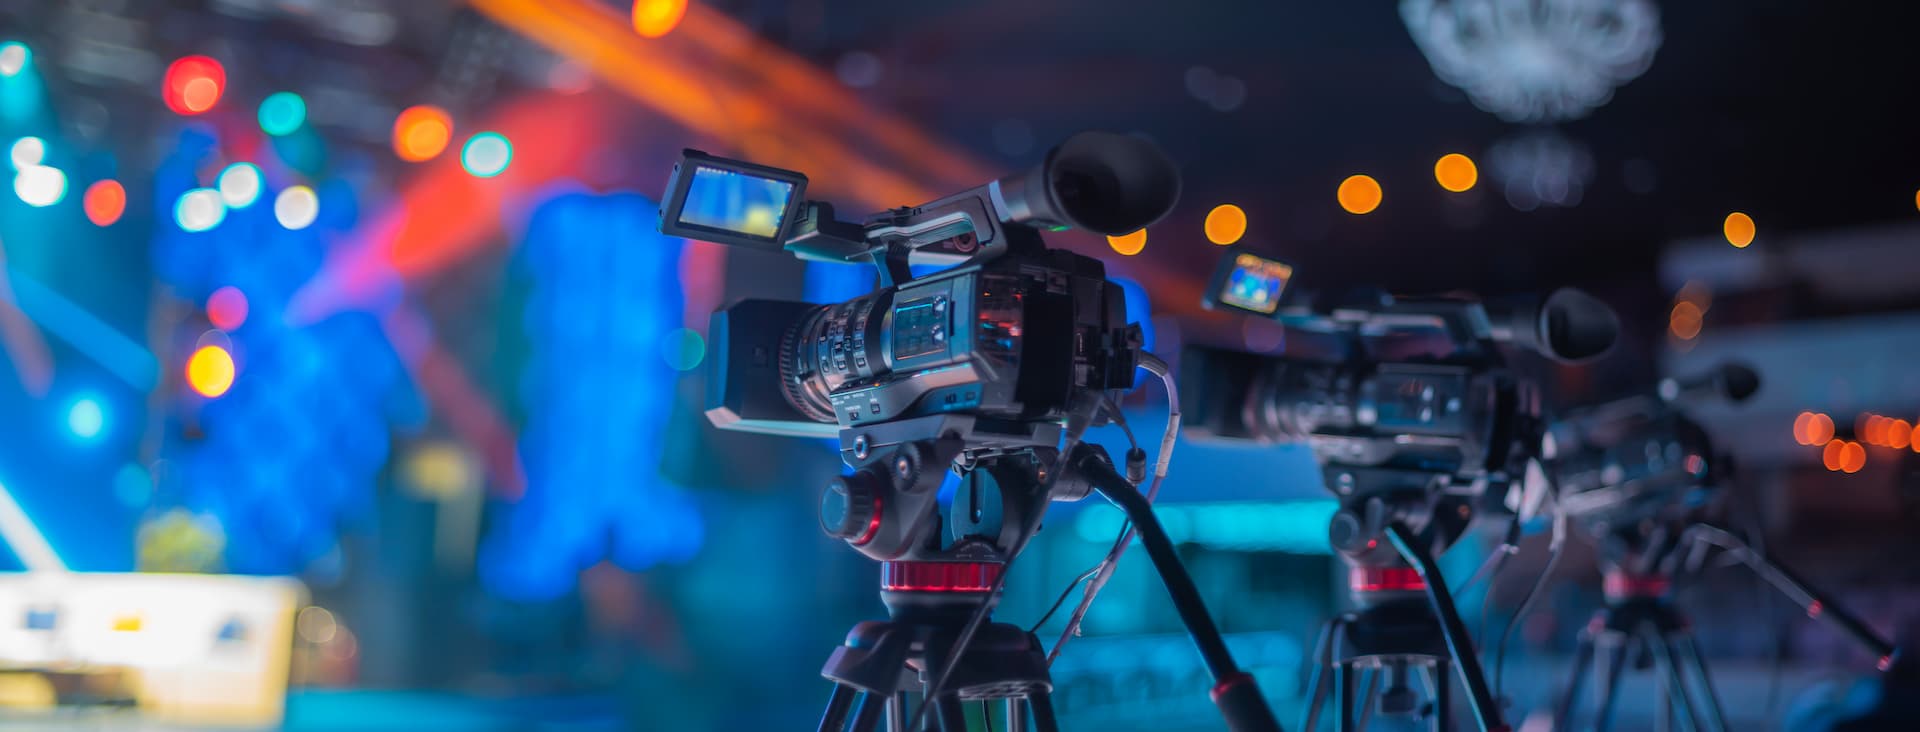 Why Choose Us as Your Event Videographer